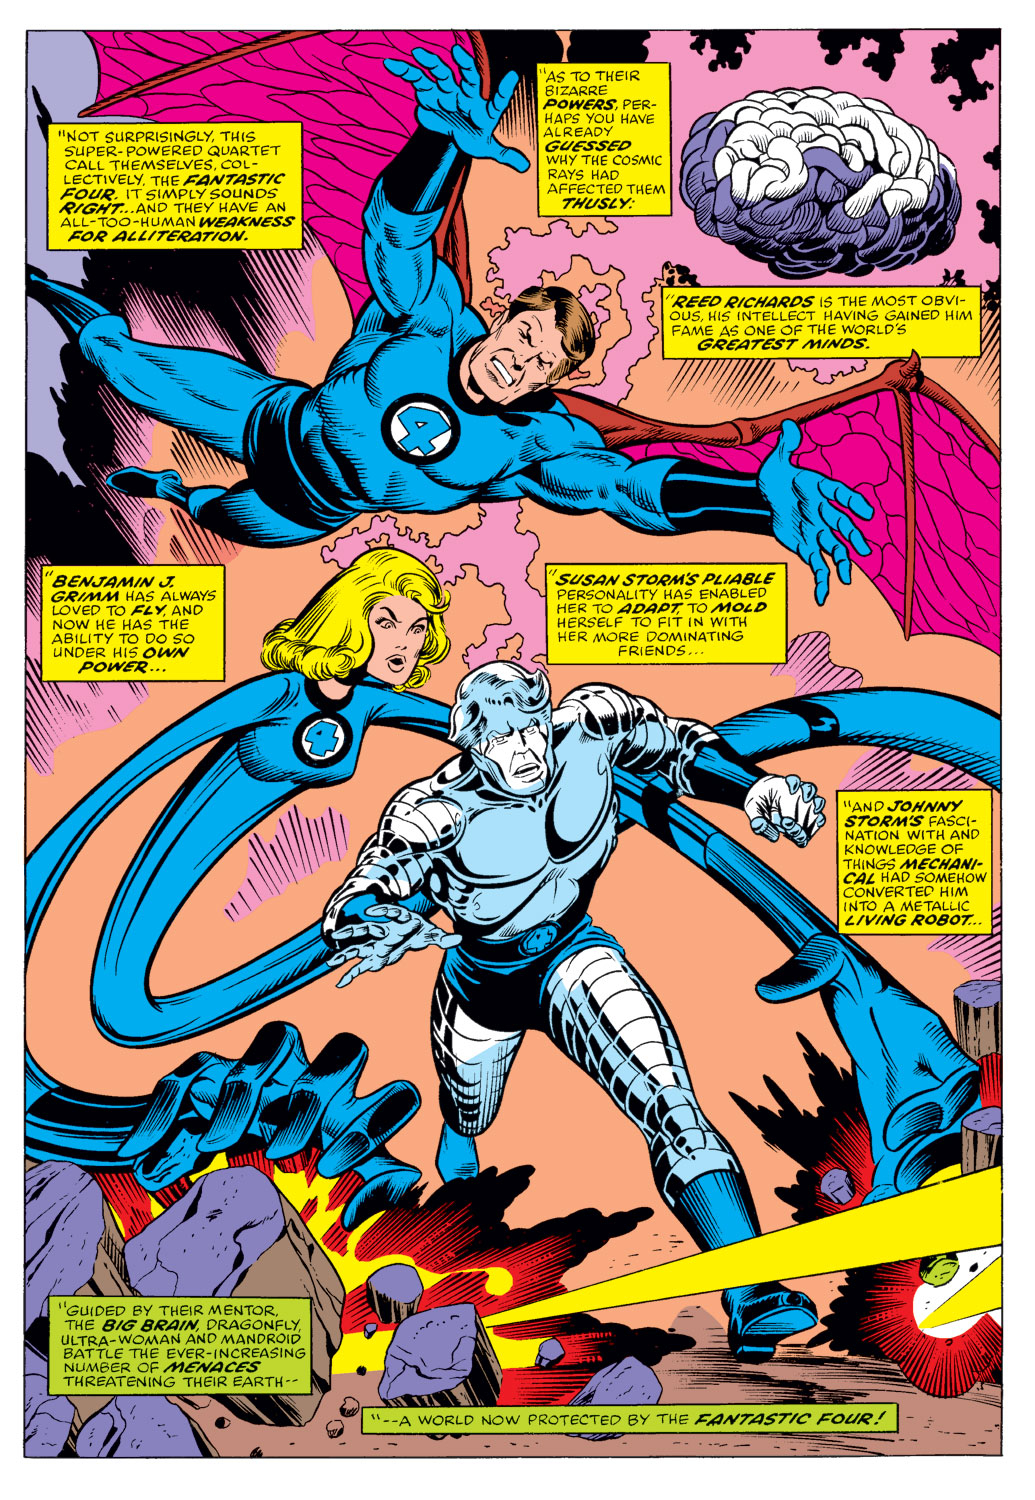 What If? (1977) issue 6 - The Fantastic Four had different superpowers - Page 14